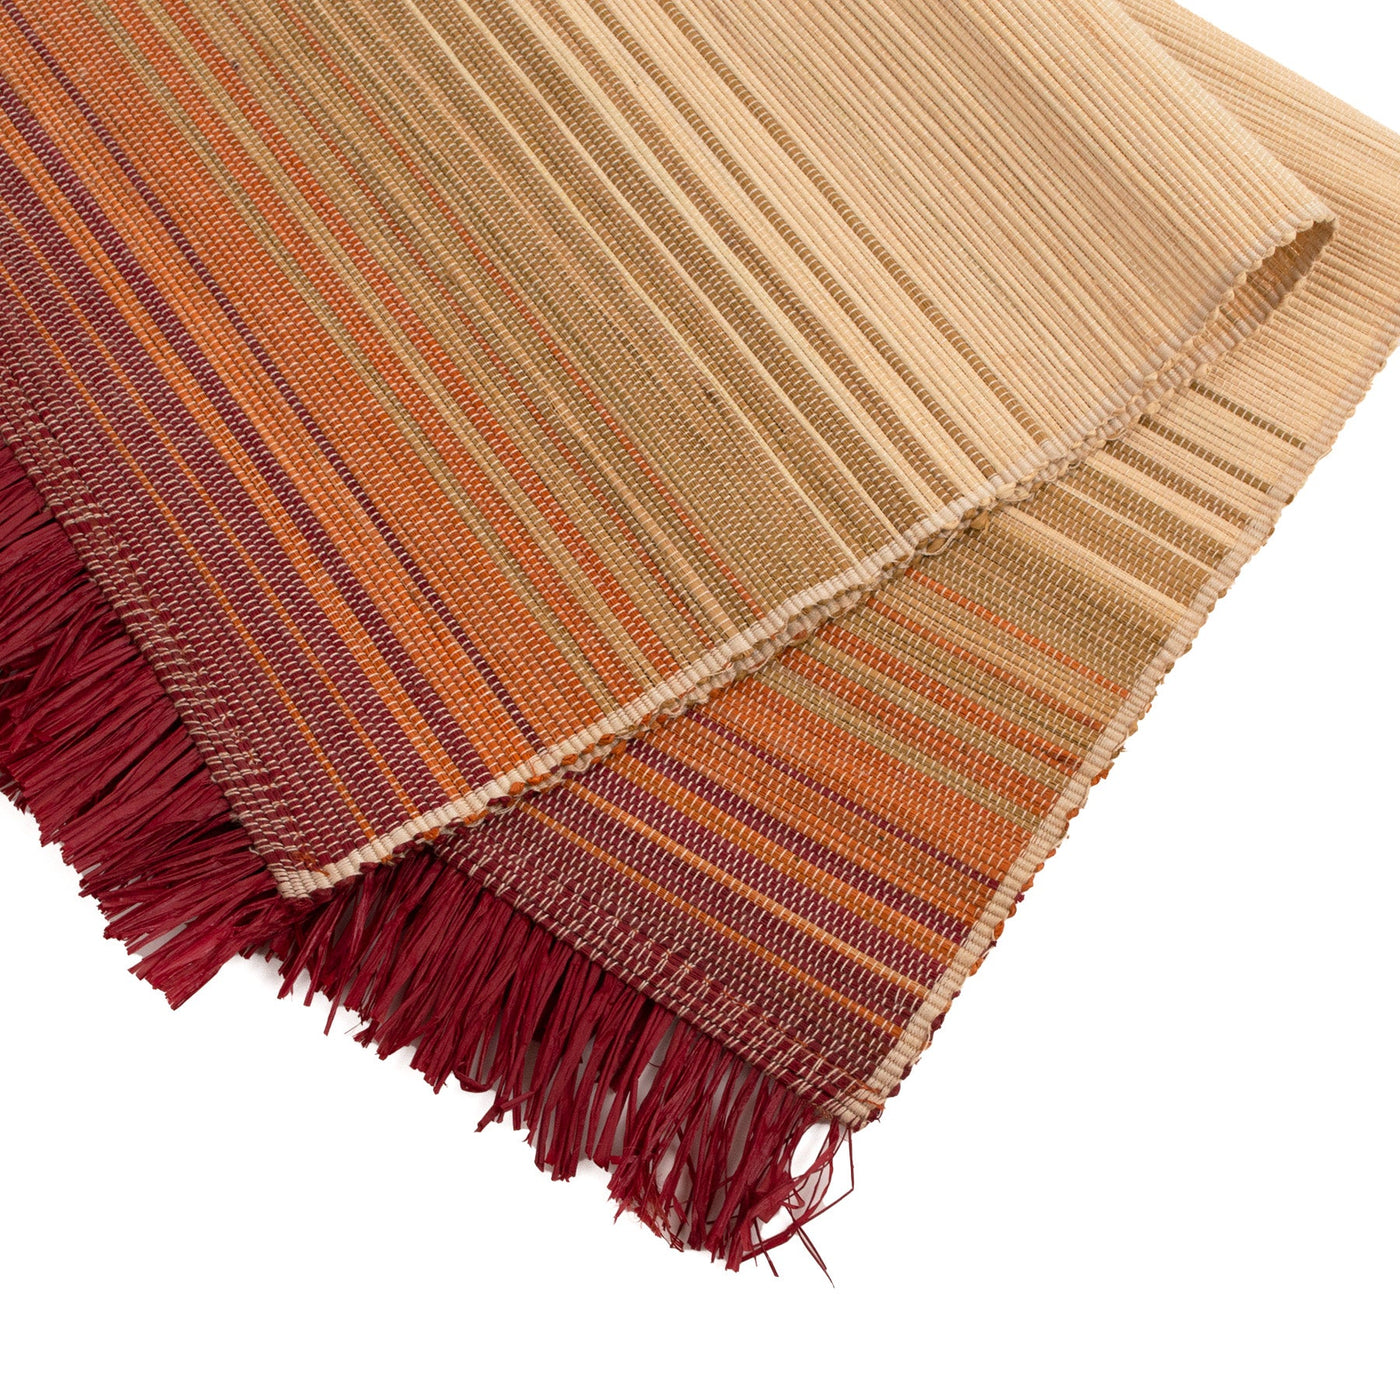 Earthen Craft Placemats - 18" Flame Fringed, Set of 2